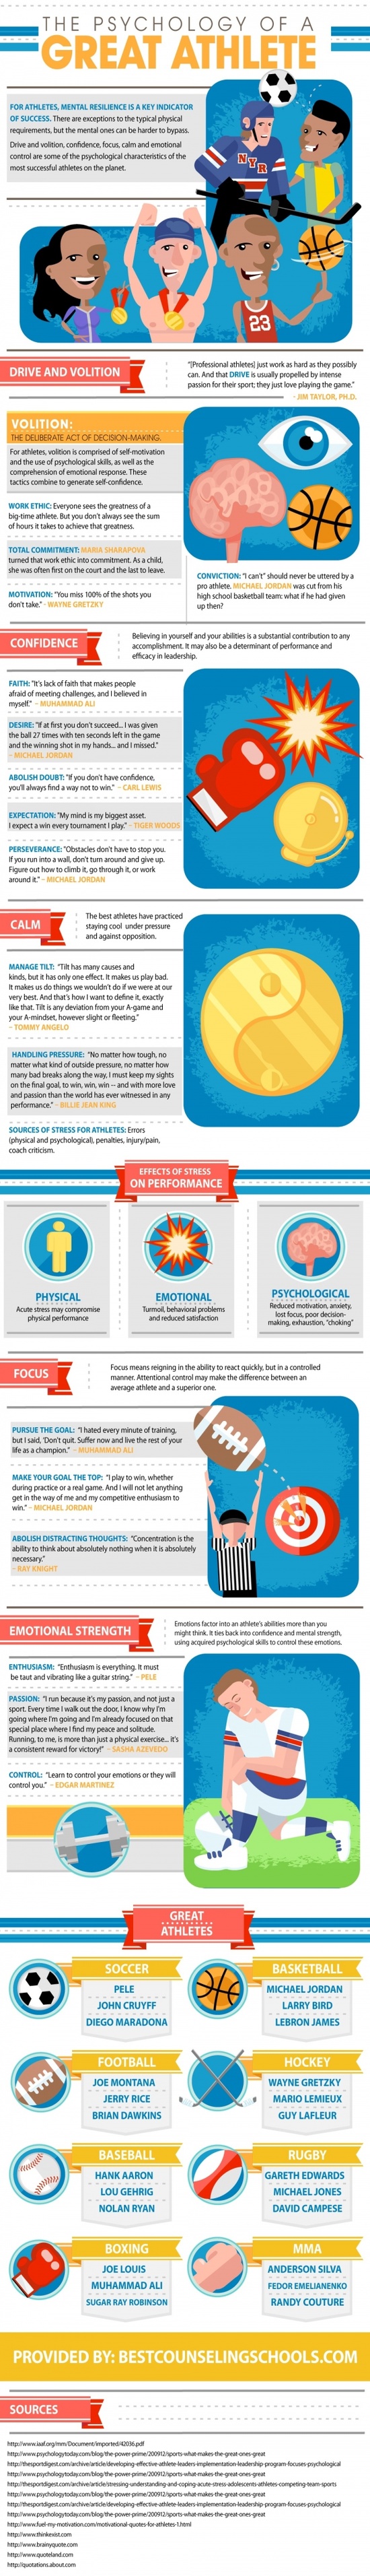 Psychology of a Great Athlete